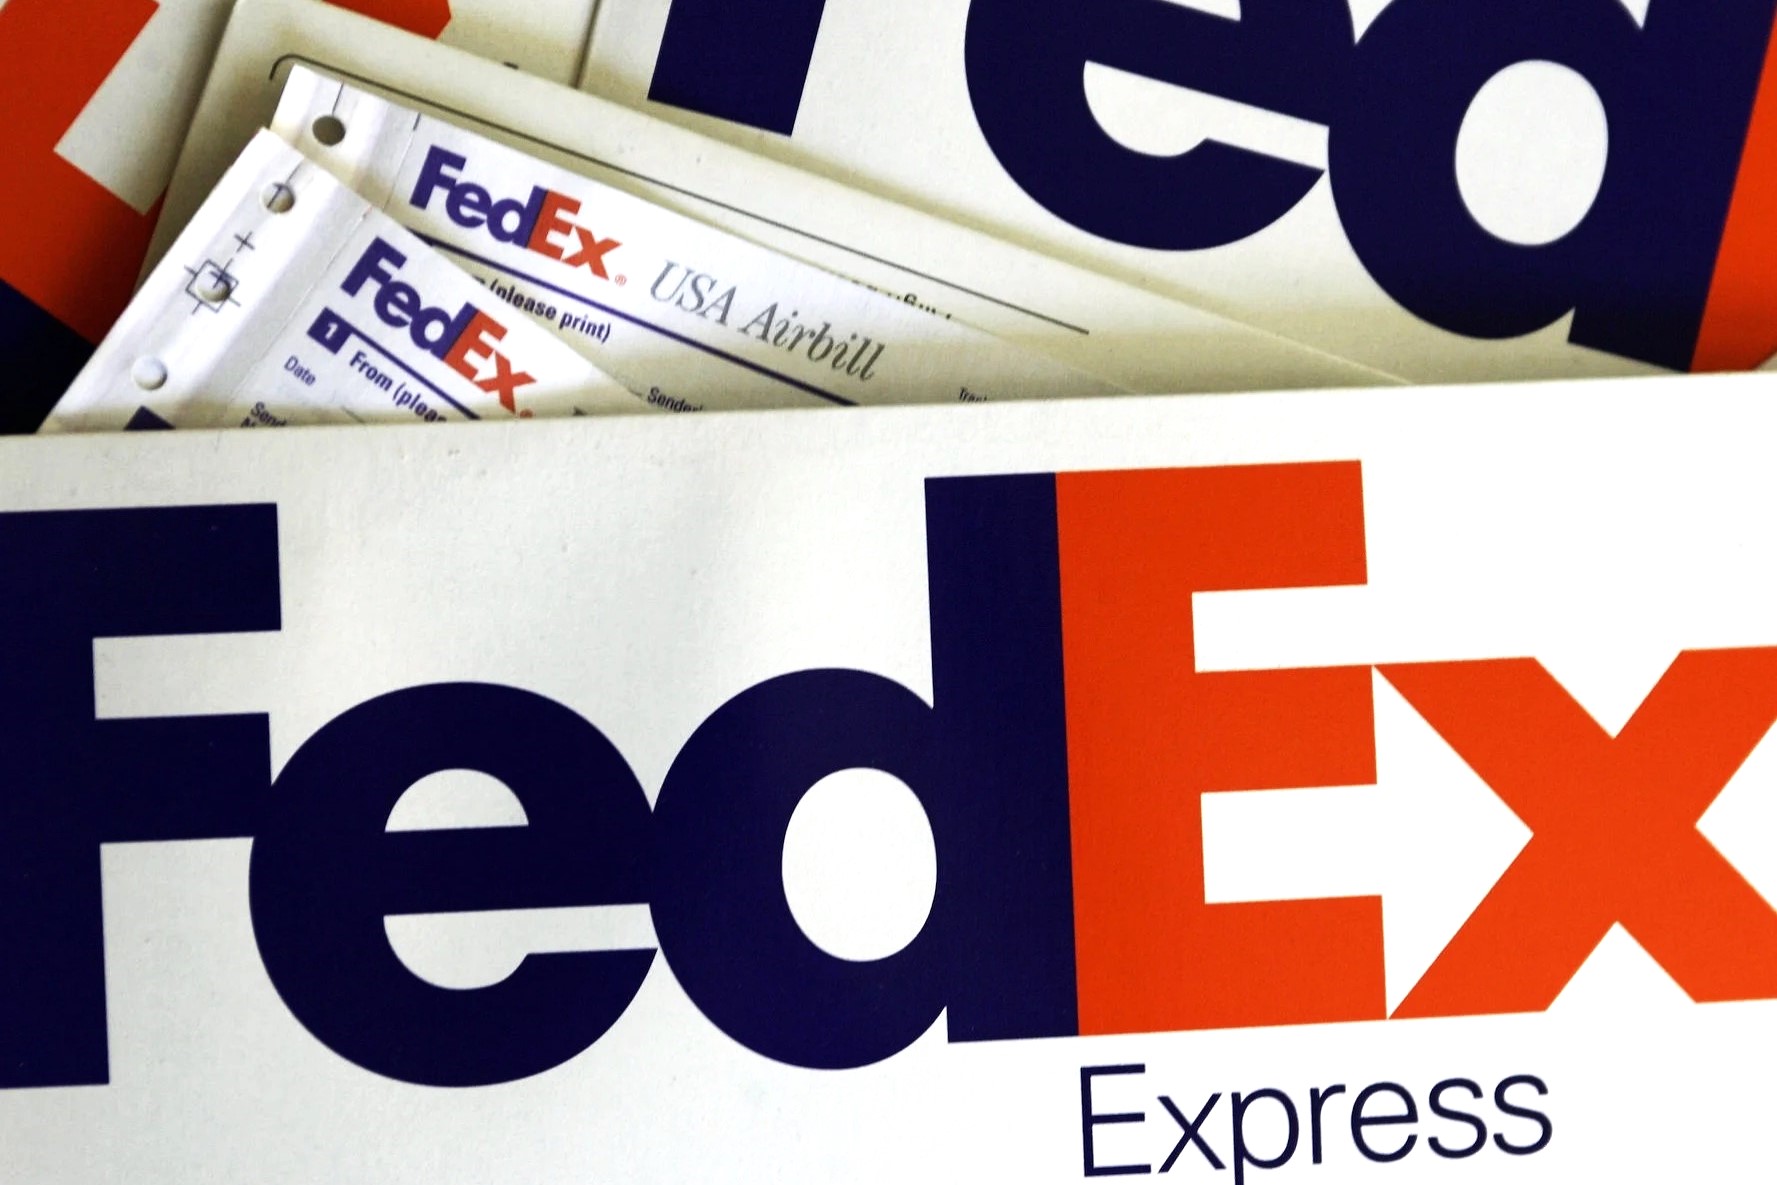 FedEx's Release Authorized: Everything You Need To Know